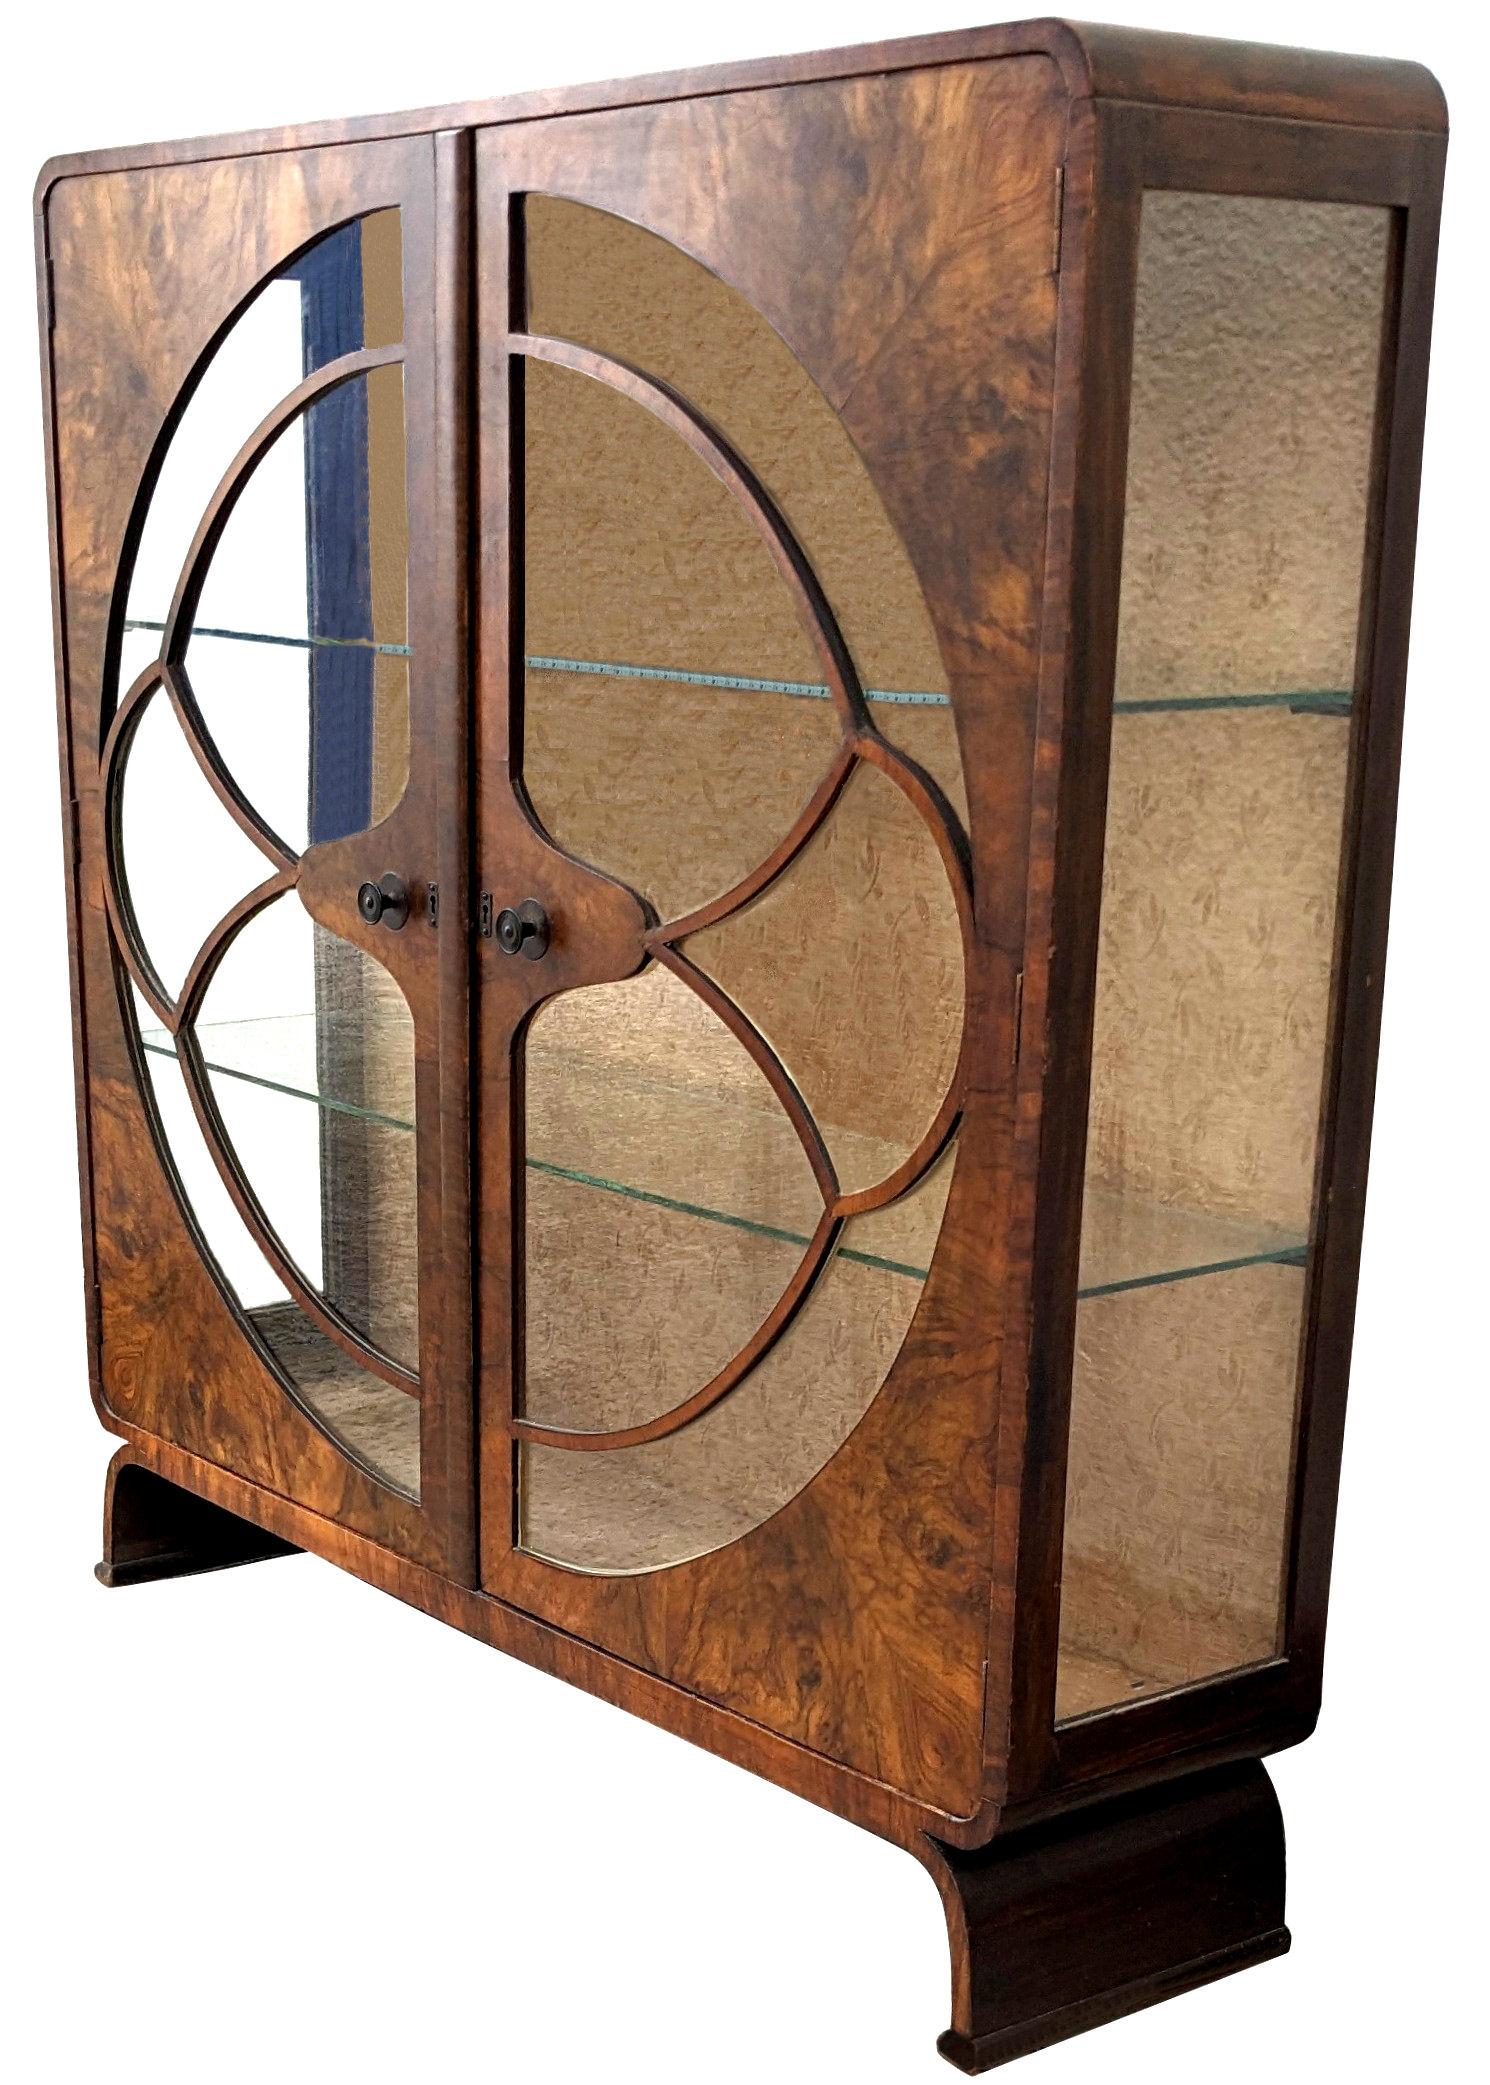 Original 1930s Art Deco display cabinet in an unusual shape. This lovely figured walnut veneered mid-tone cabinet features a generously sized interior display area for your 'collections'. The cabinet itself is a round shouldered square shape on half